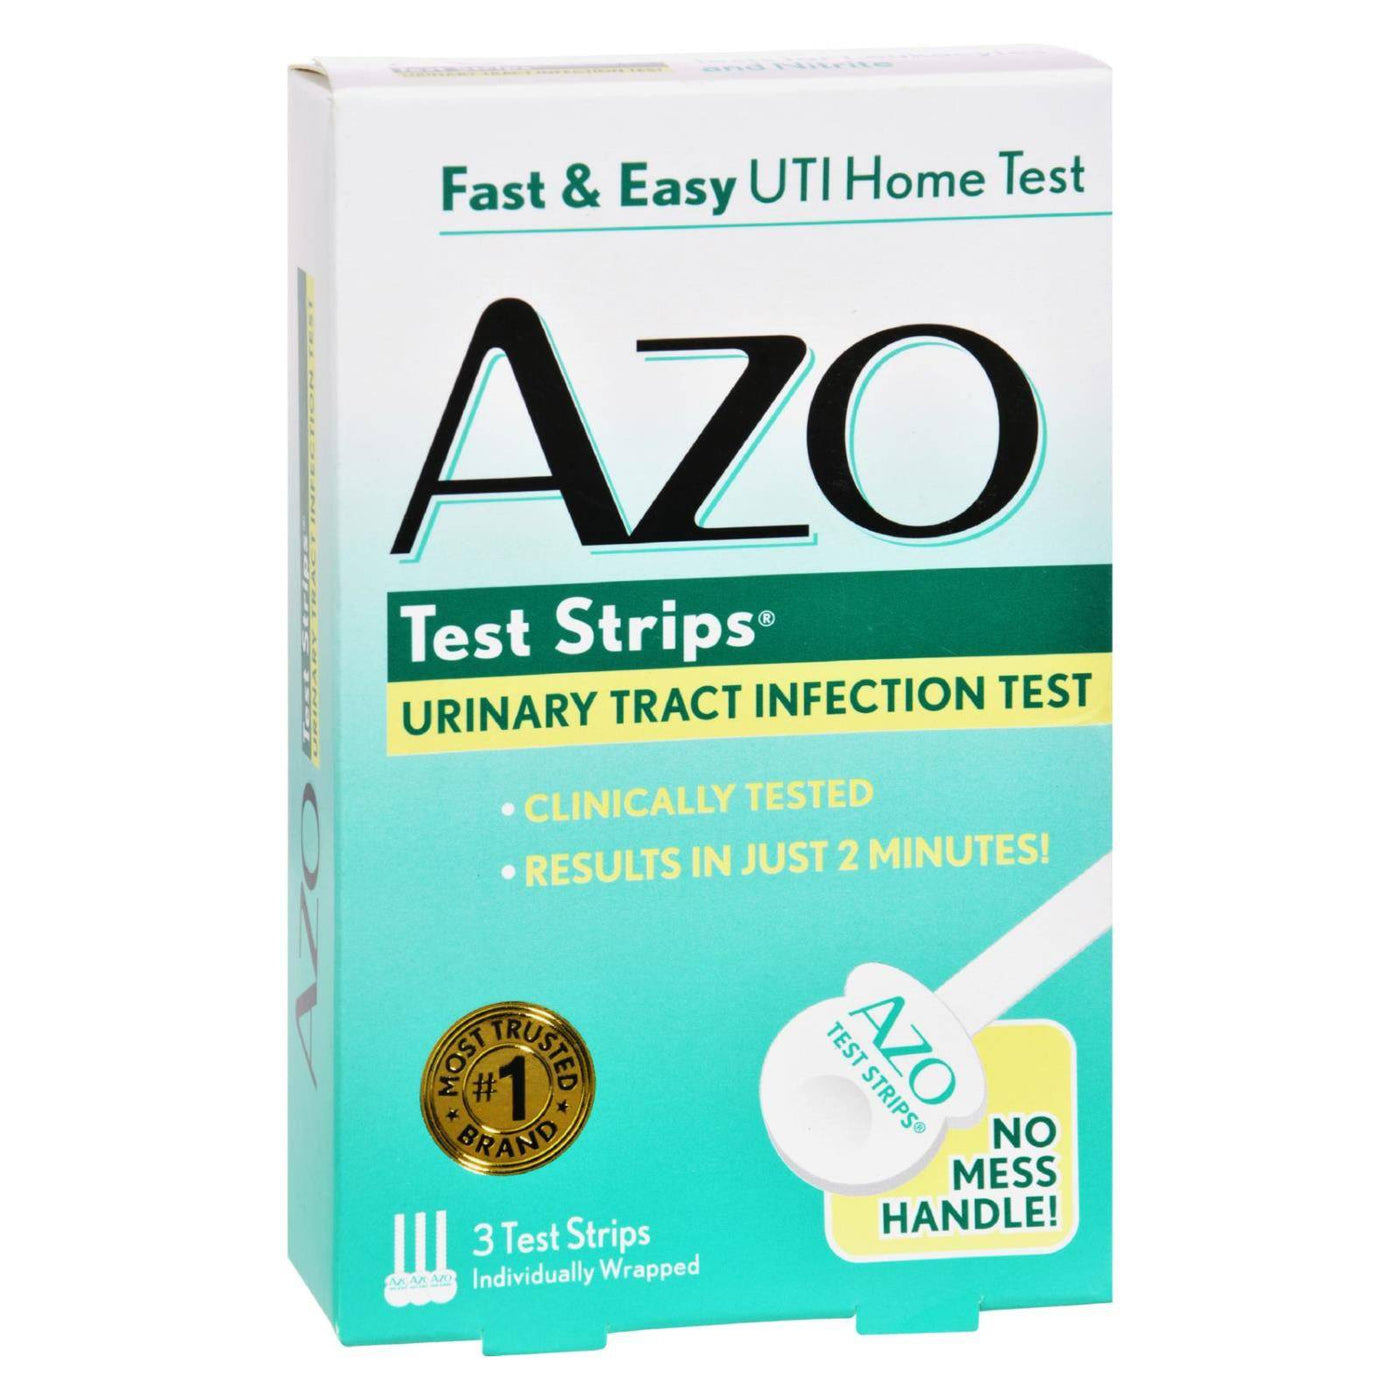 Azo Test Strips - 3 Test Strips | OnlyNaturals.us